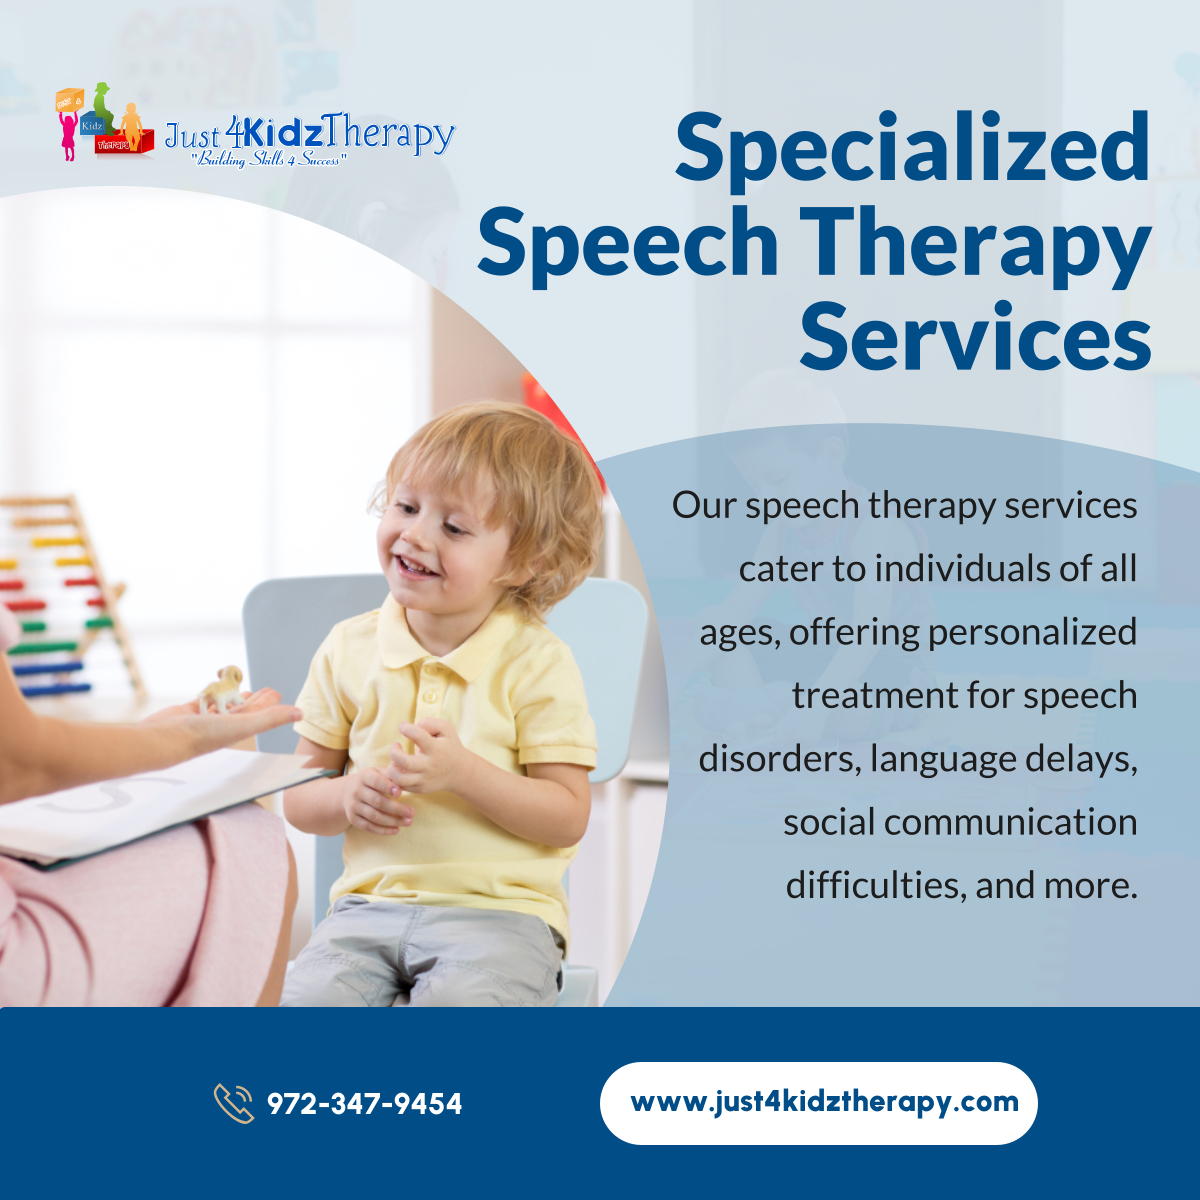 Enjoy the effectiveness of our specialized speech therapy services in assisting individuals to conquer communication barriers and flourish. Reach out to us for further details. 

#CollinCountyTX #PediatricTherapyServices #SpeechTherapy #CommunicationSkills #LanguageDevelopment